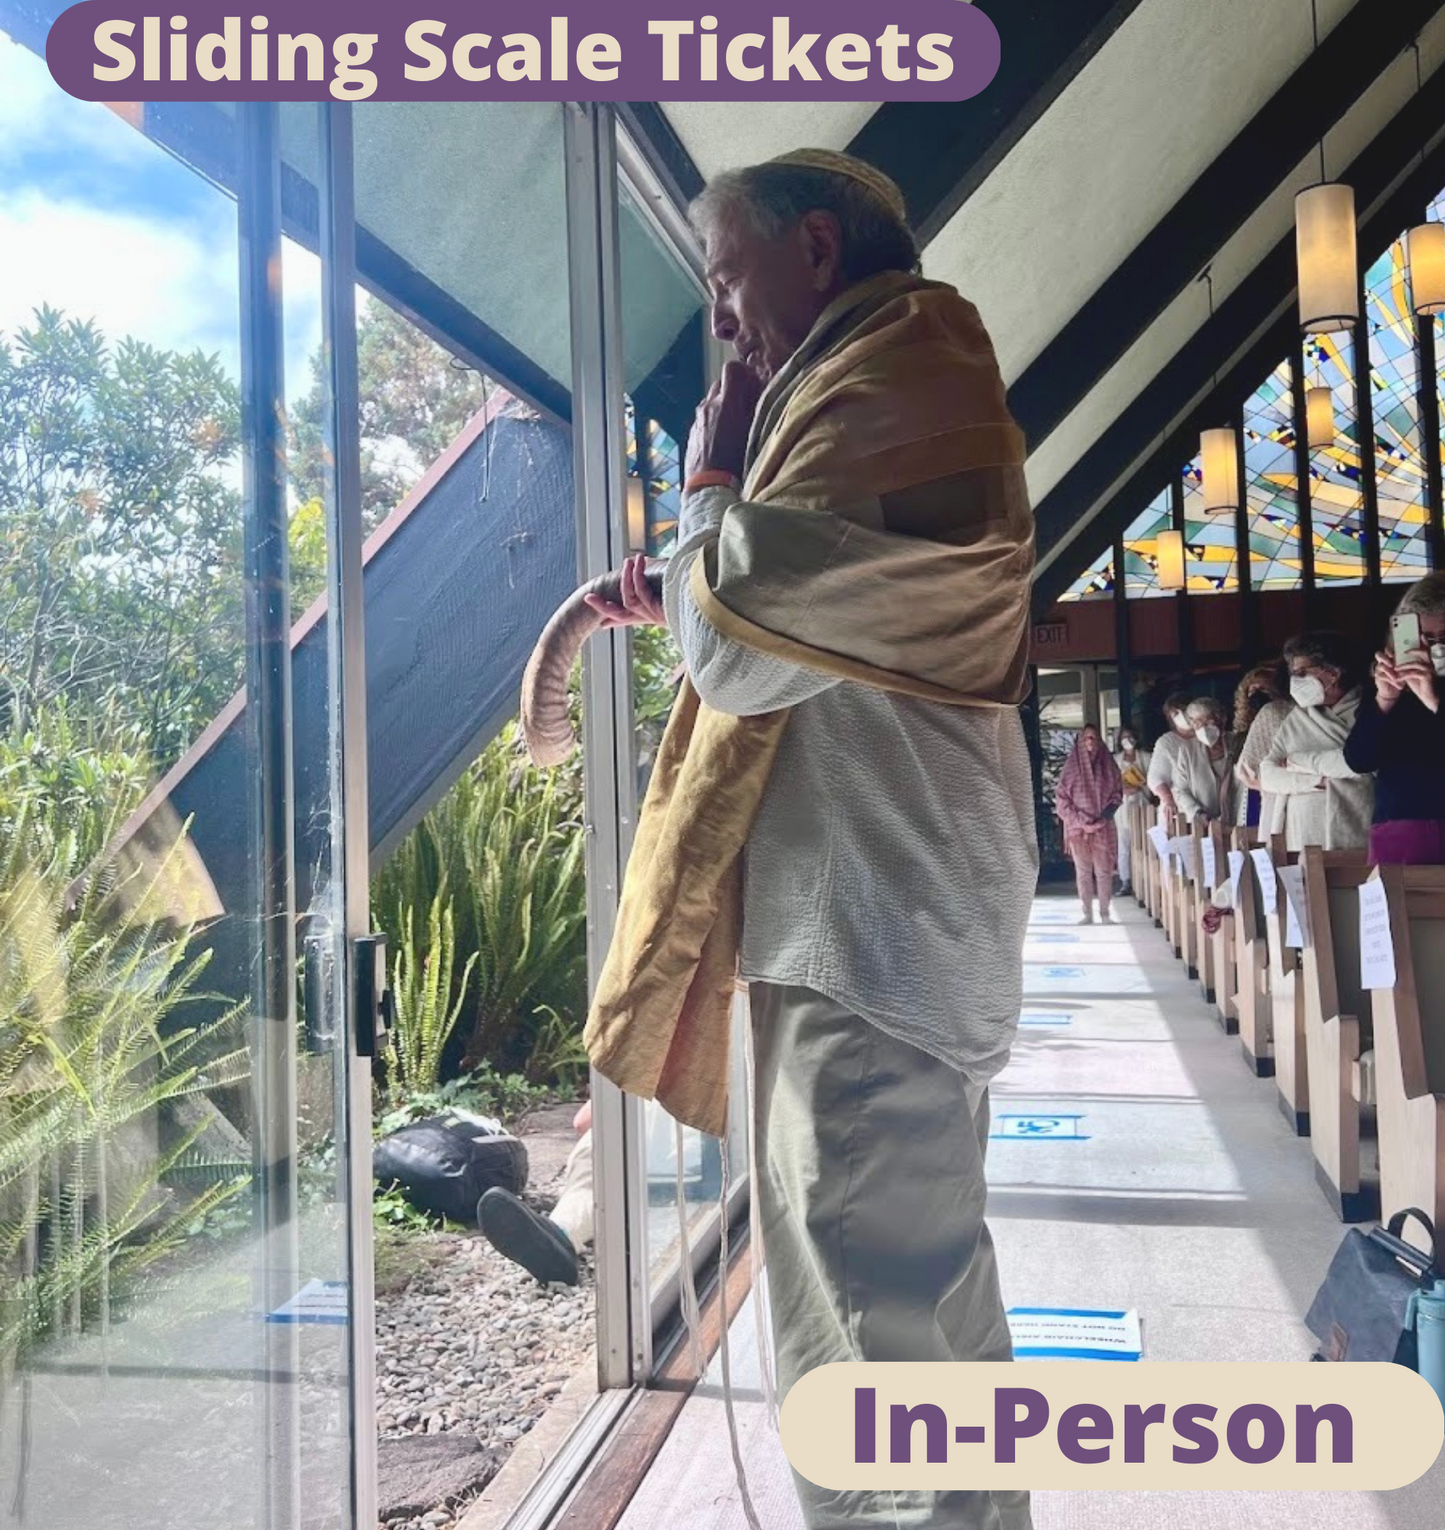 Sliding Scale Tickets